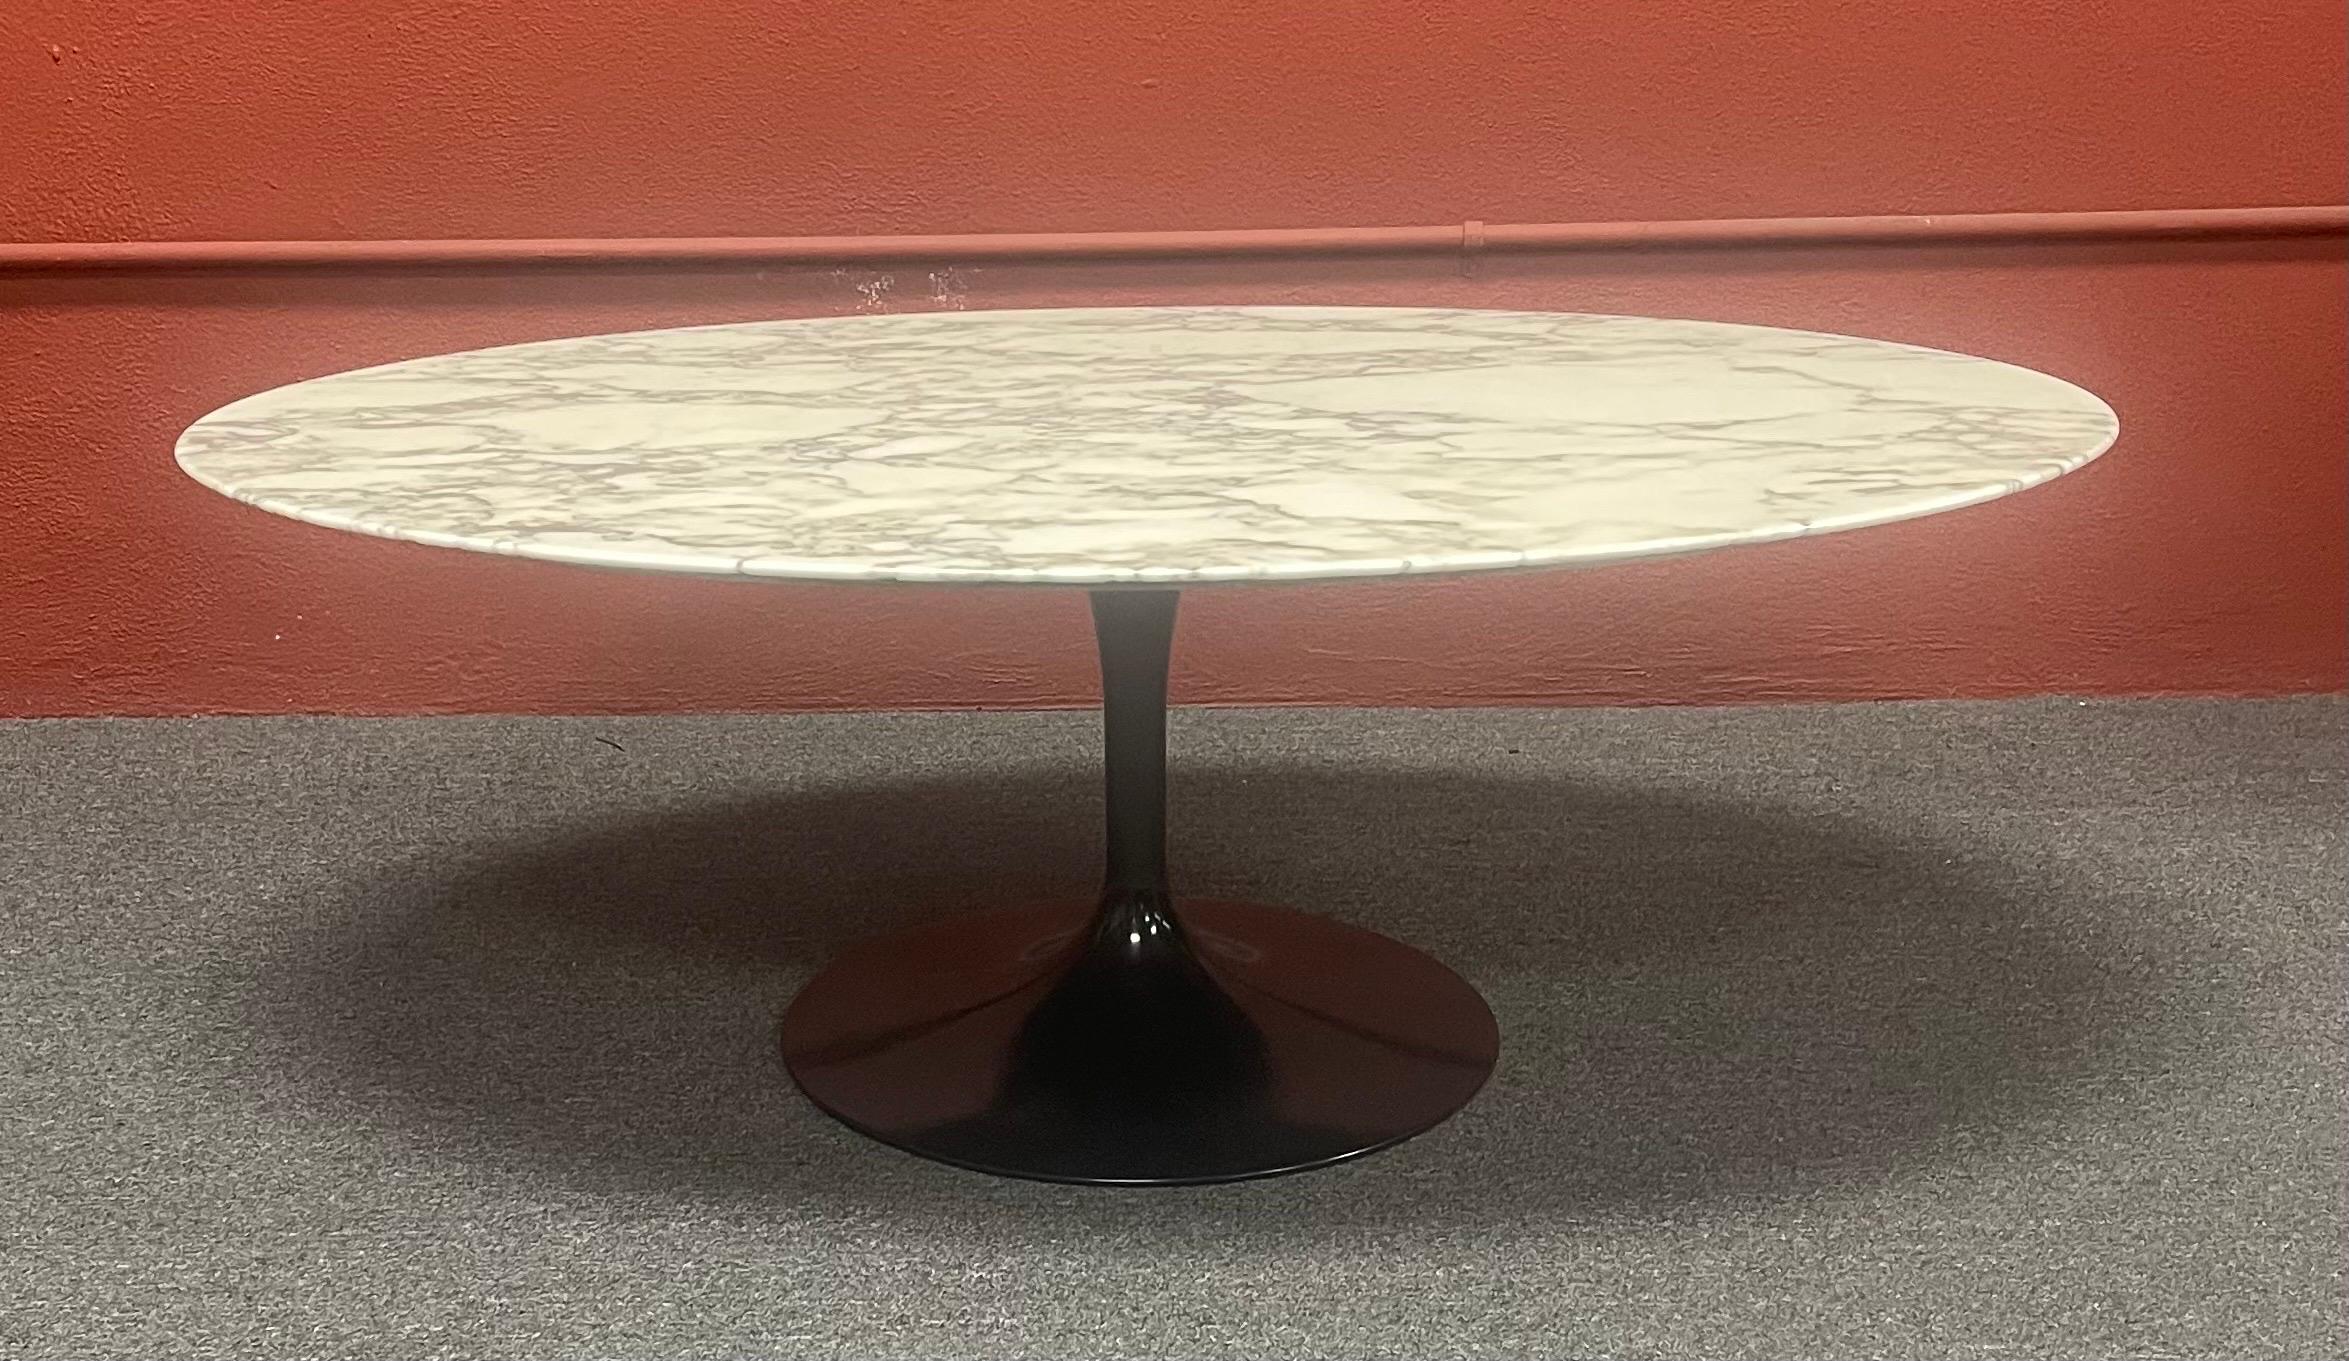 Authentic Polished Carrara Marble Top Coffee Table by Eero Saarinen for Knoll 1